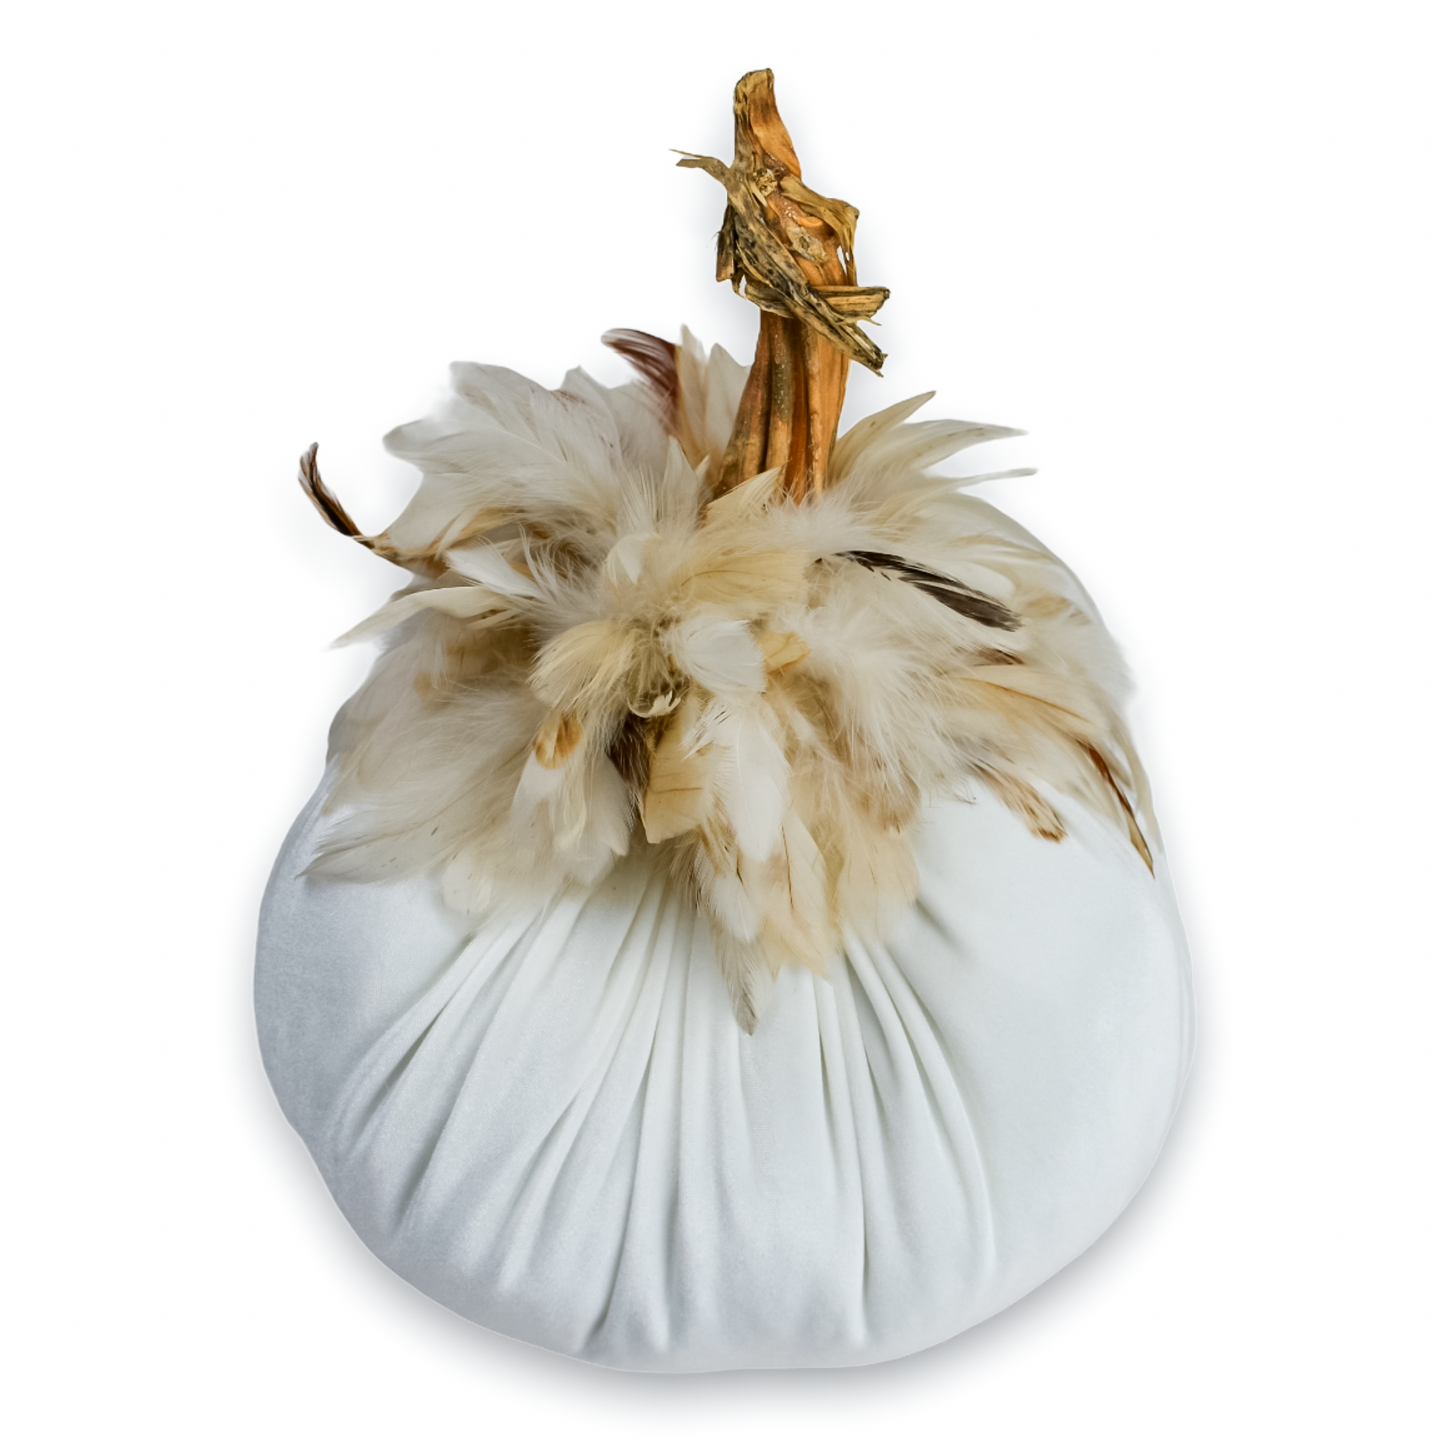 Velvet Pumpkins with Rooster Schlappen Feathers